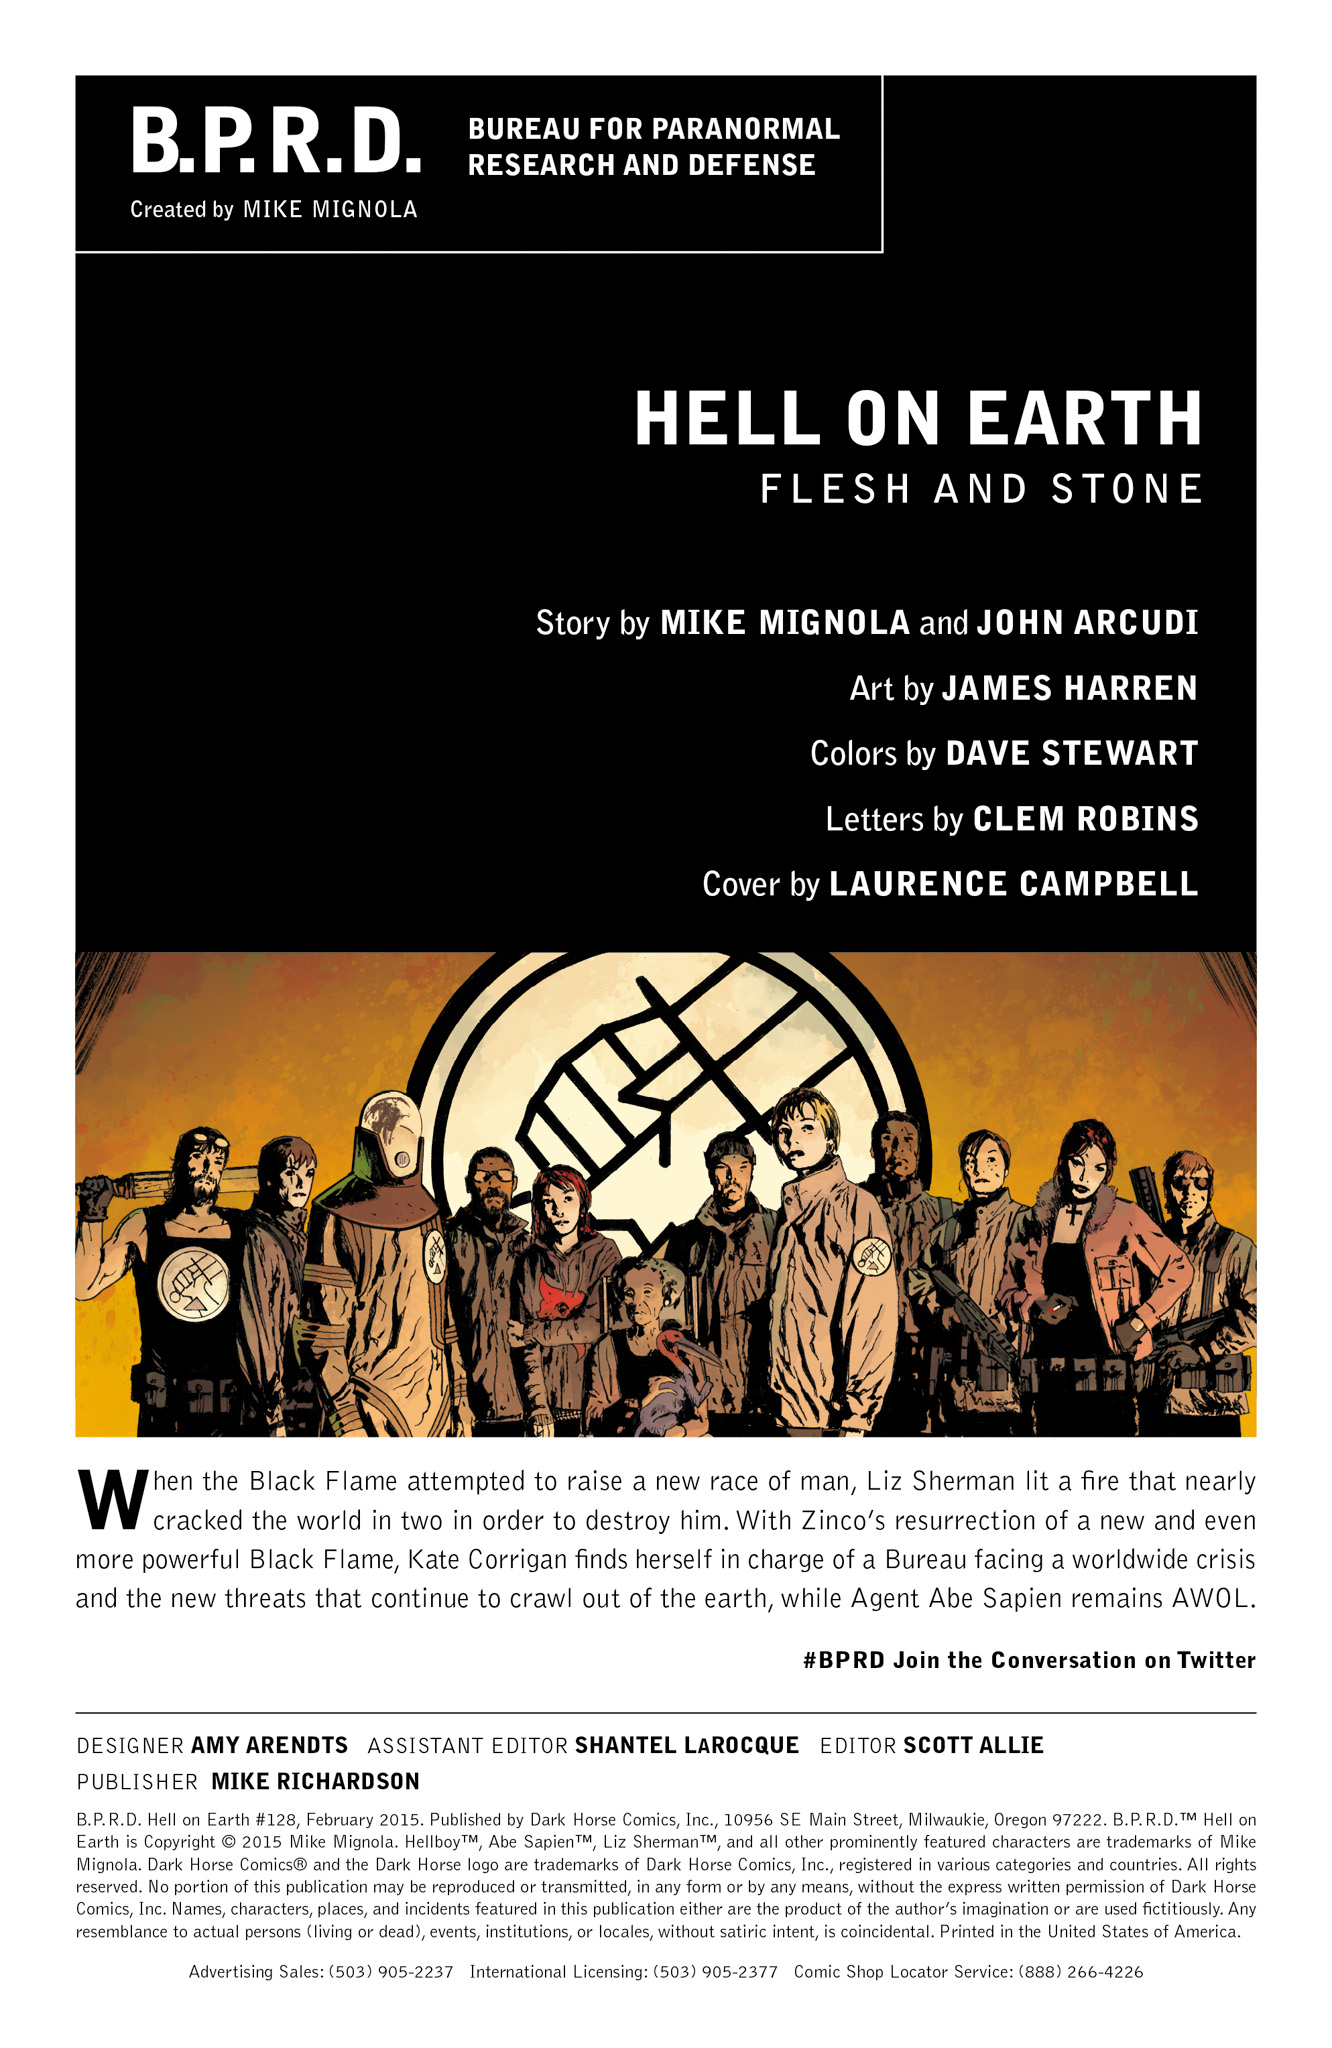 Read online B.P.R.D. Hell on Earth comic -  Issue #128 - 2